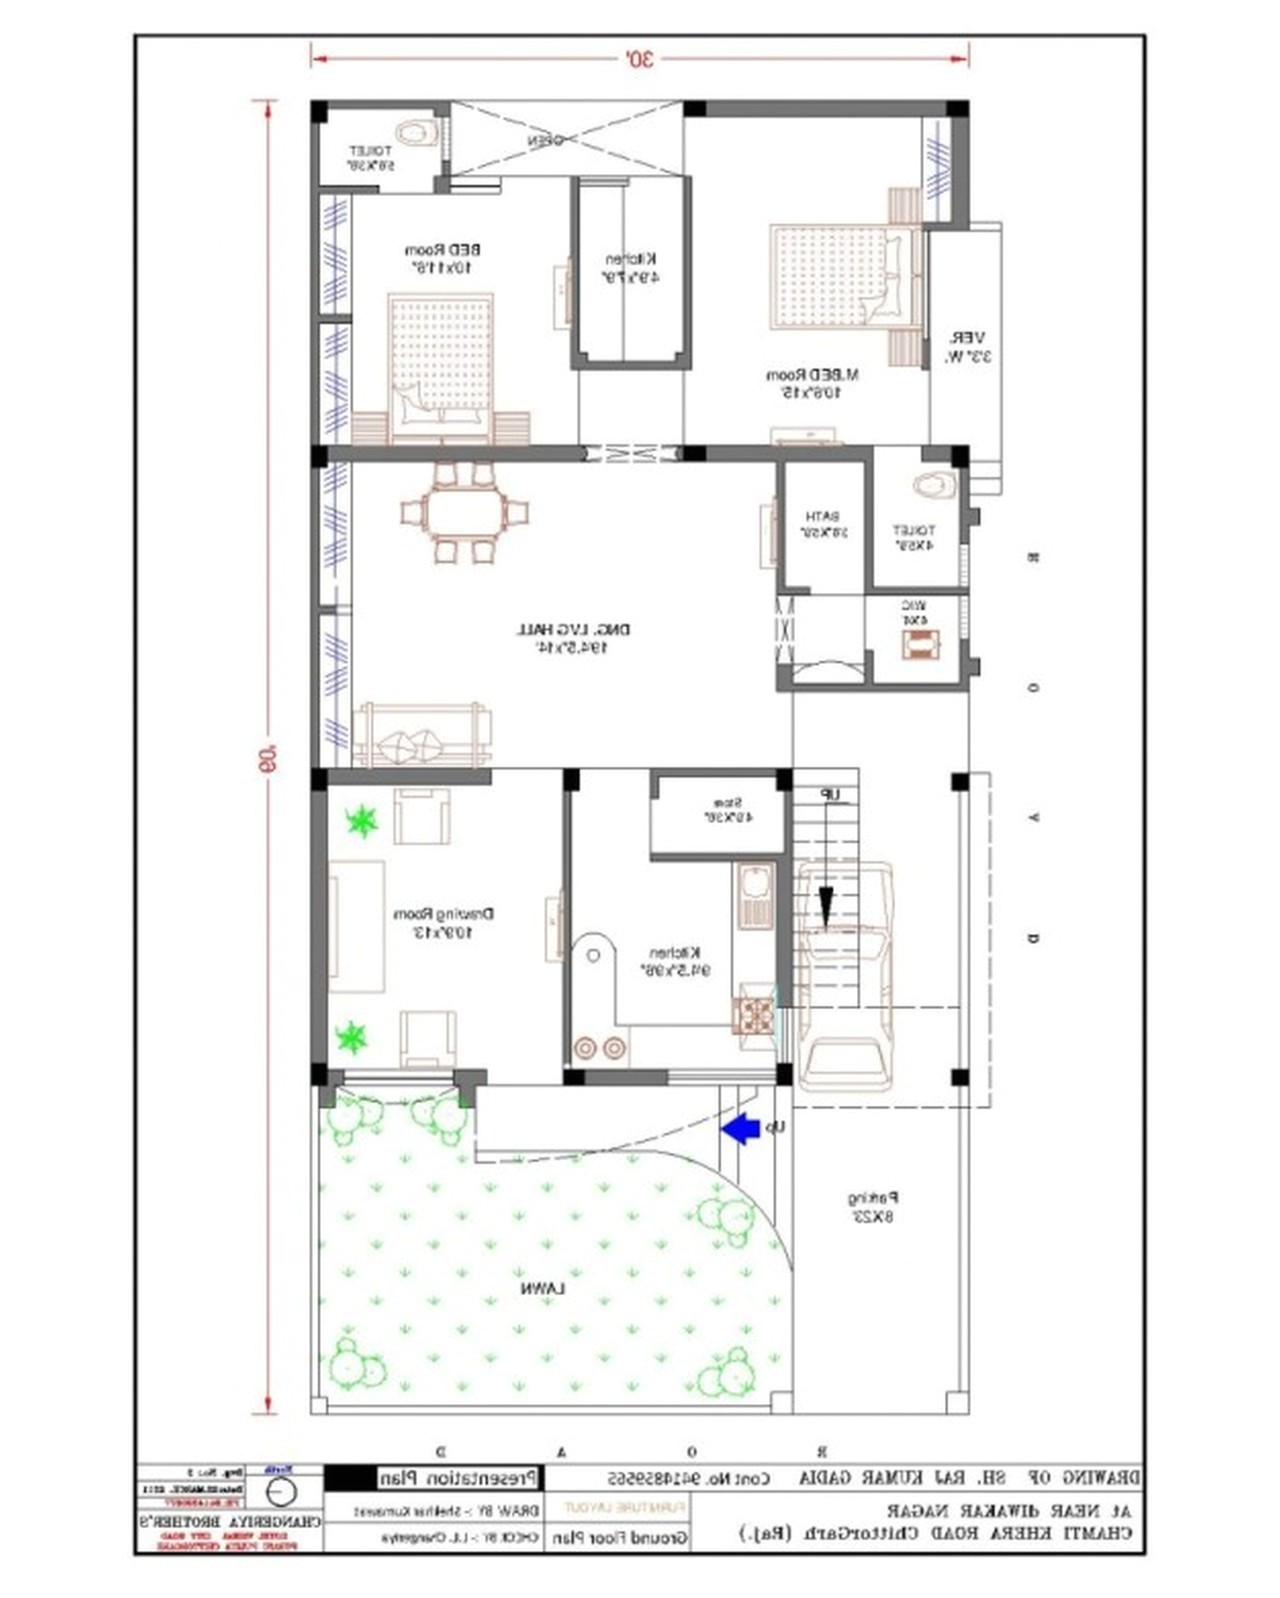 Indian Home Design Plans Free Small House Plans India Homes Floor Plans